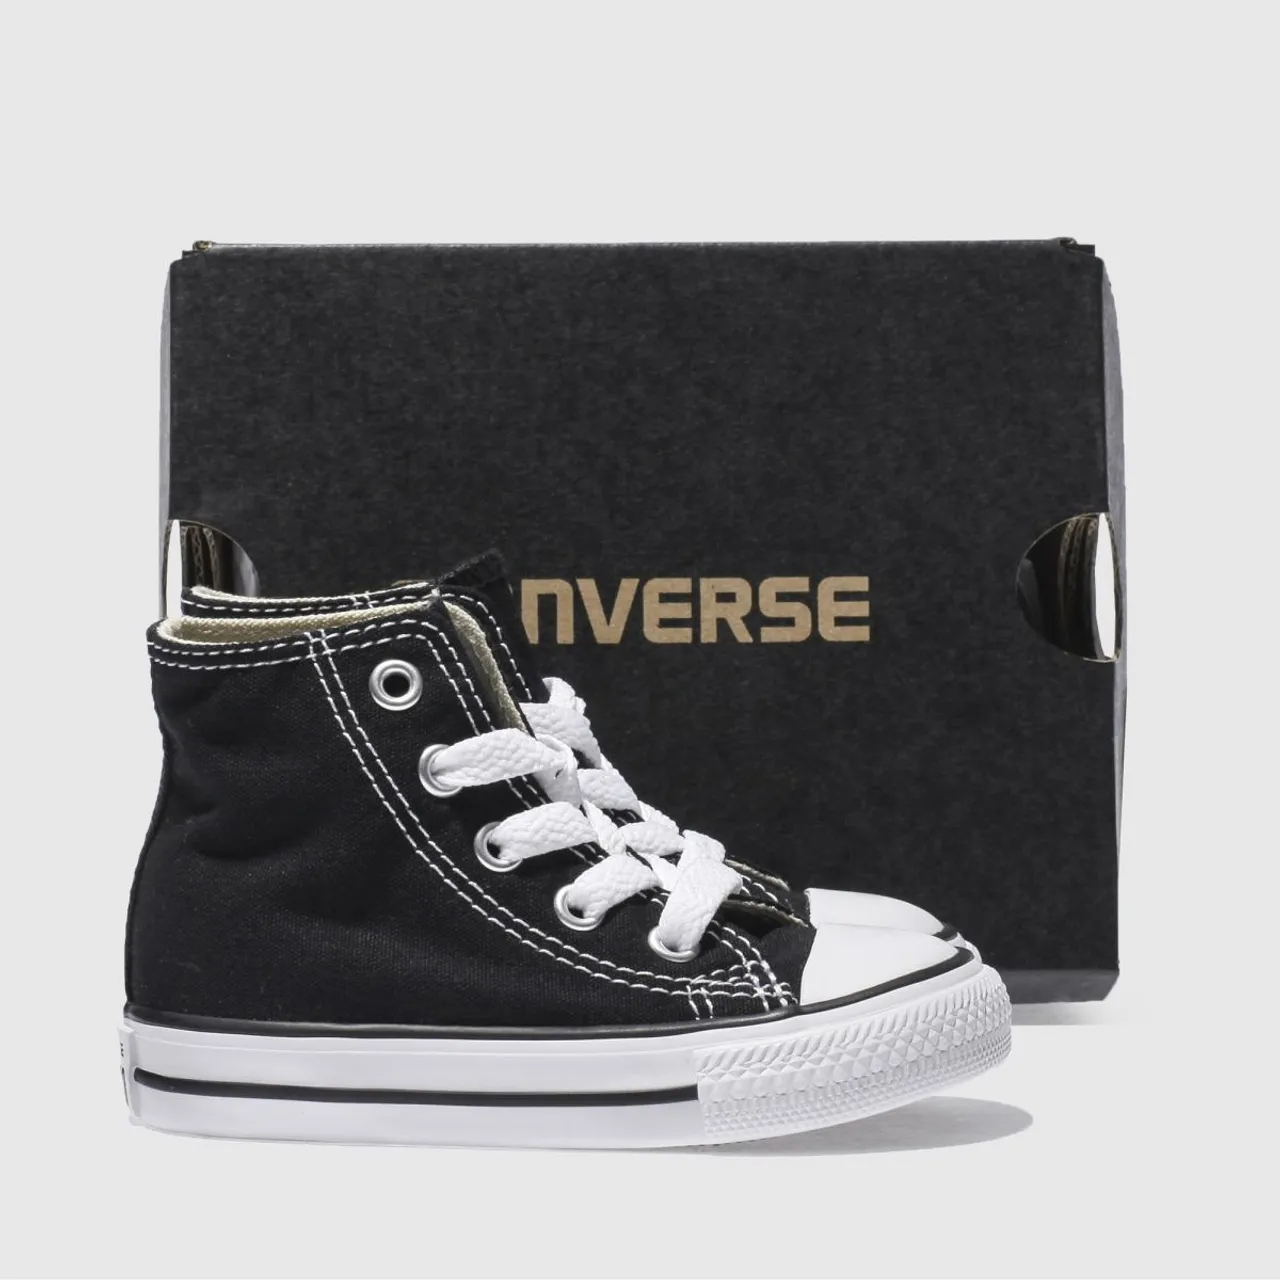 Converse Black All Star Hi Toddler Trainers